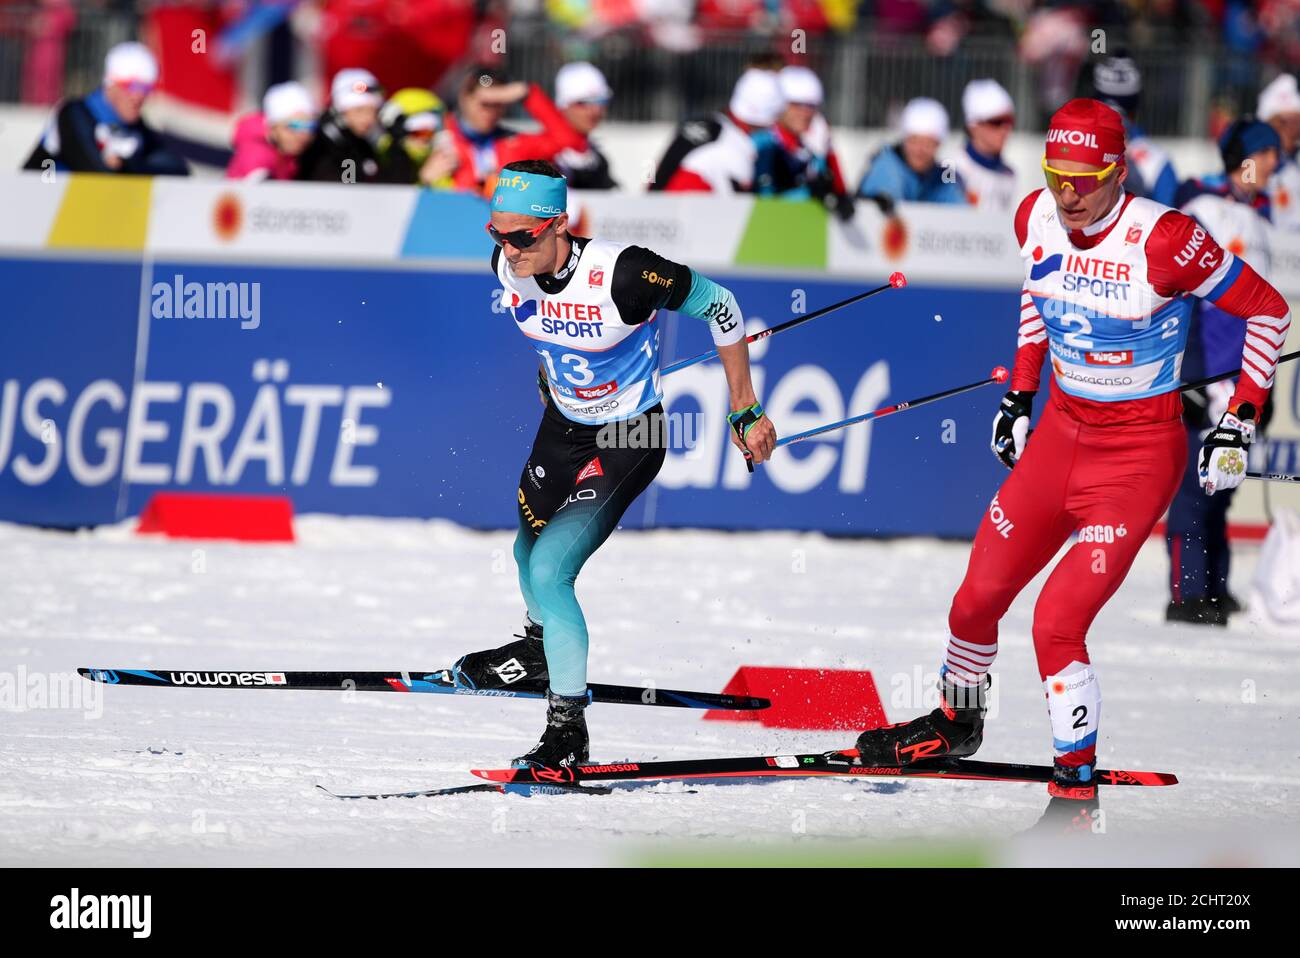 Cross Country Skiing Fis Nordic World Ski Championships Men S Skiathlon Seefeld Austria February 23 2019 France S Clement Parisse And Russia S Alexander Bolshunov In Action Reuters Lisi Niesner Stock Photo Alamy